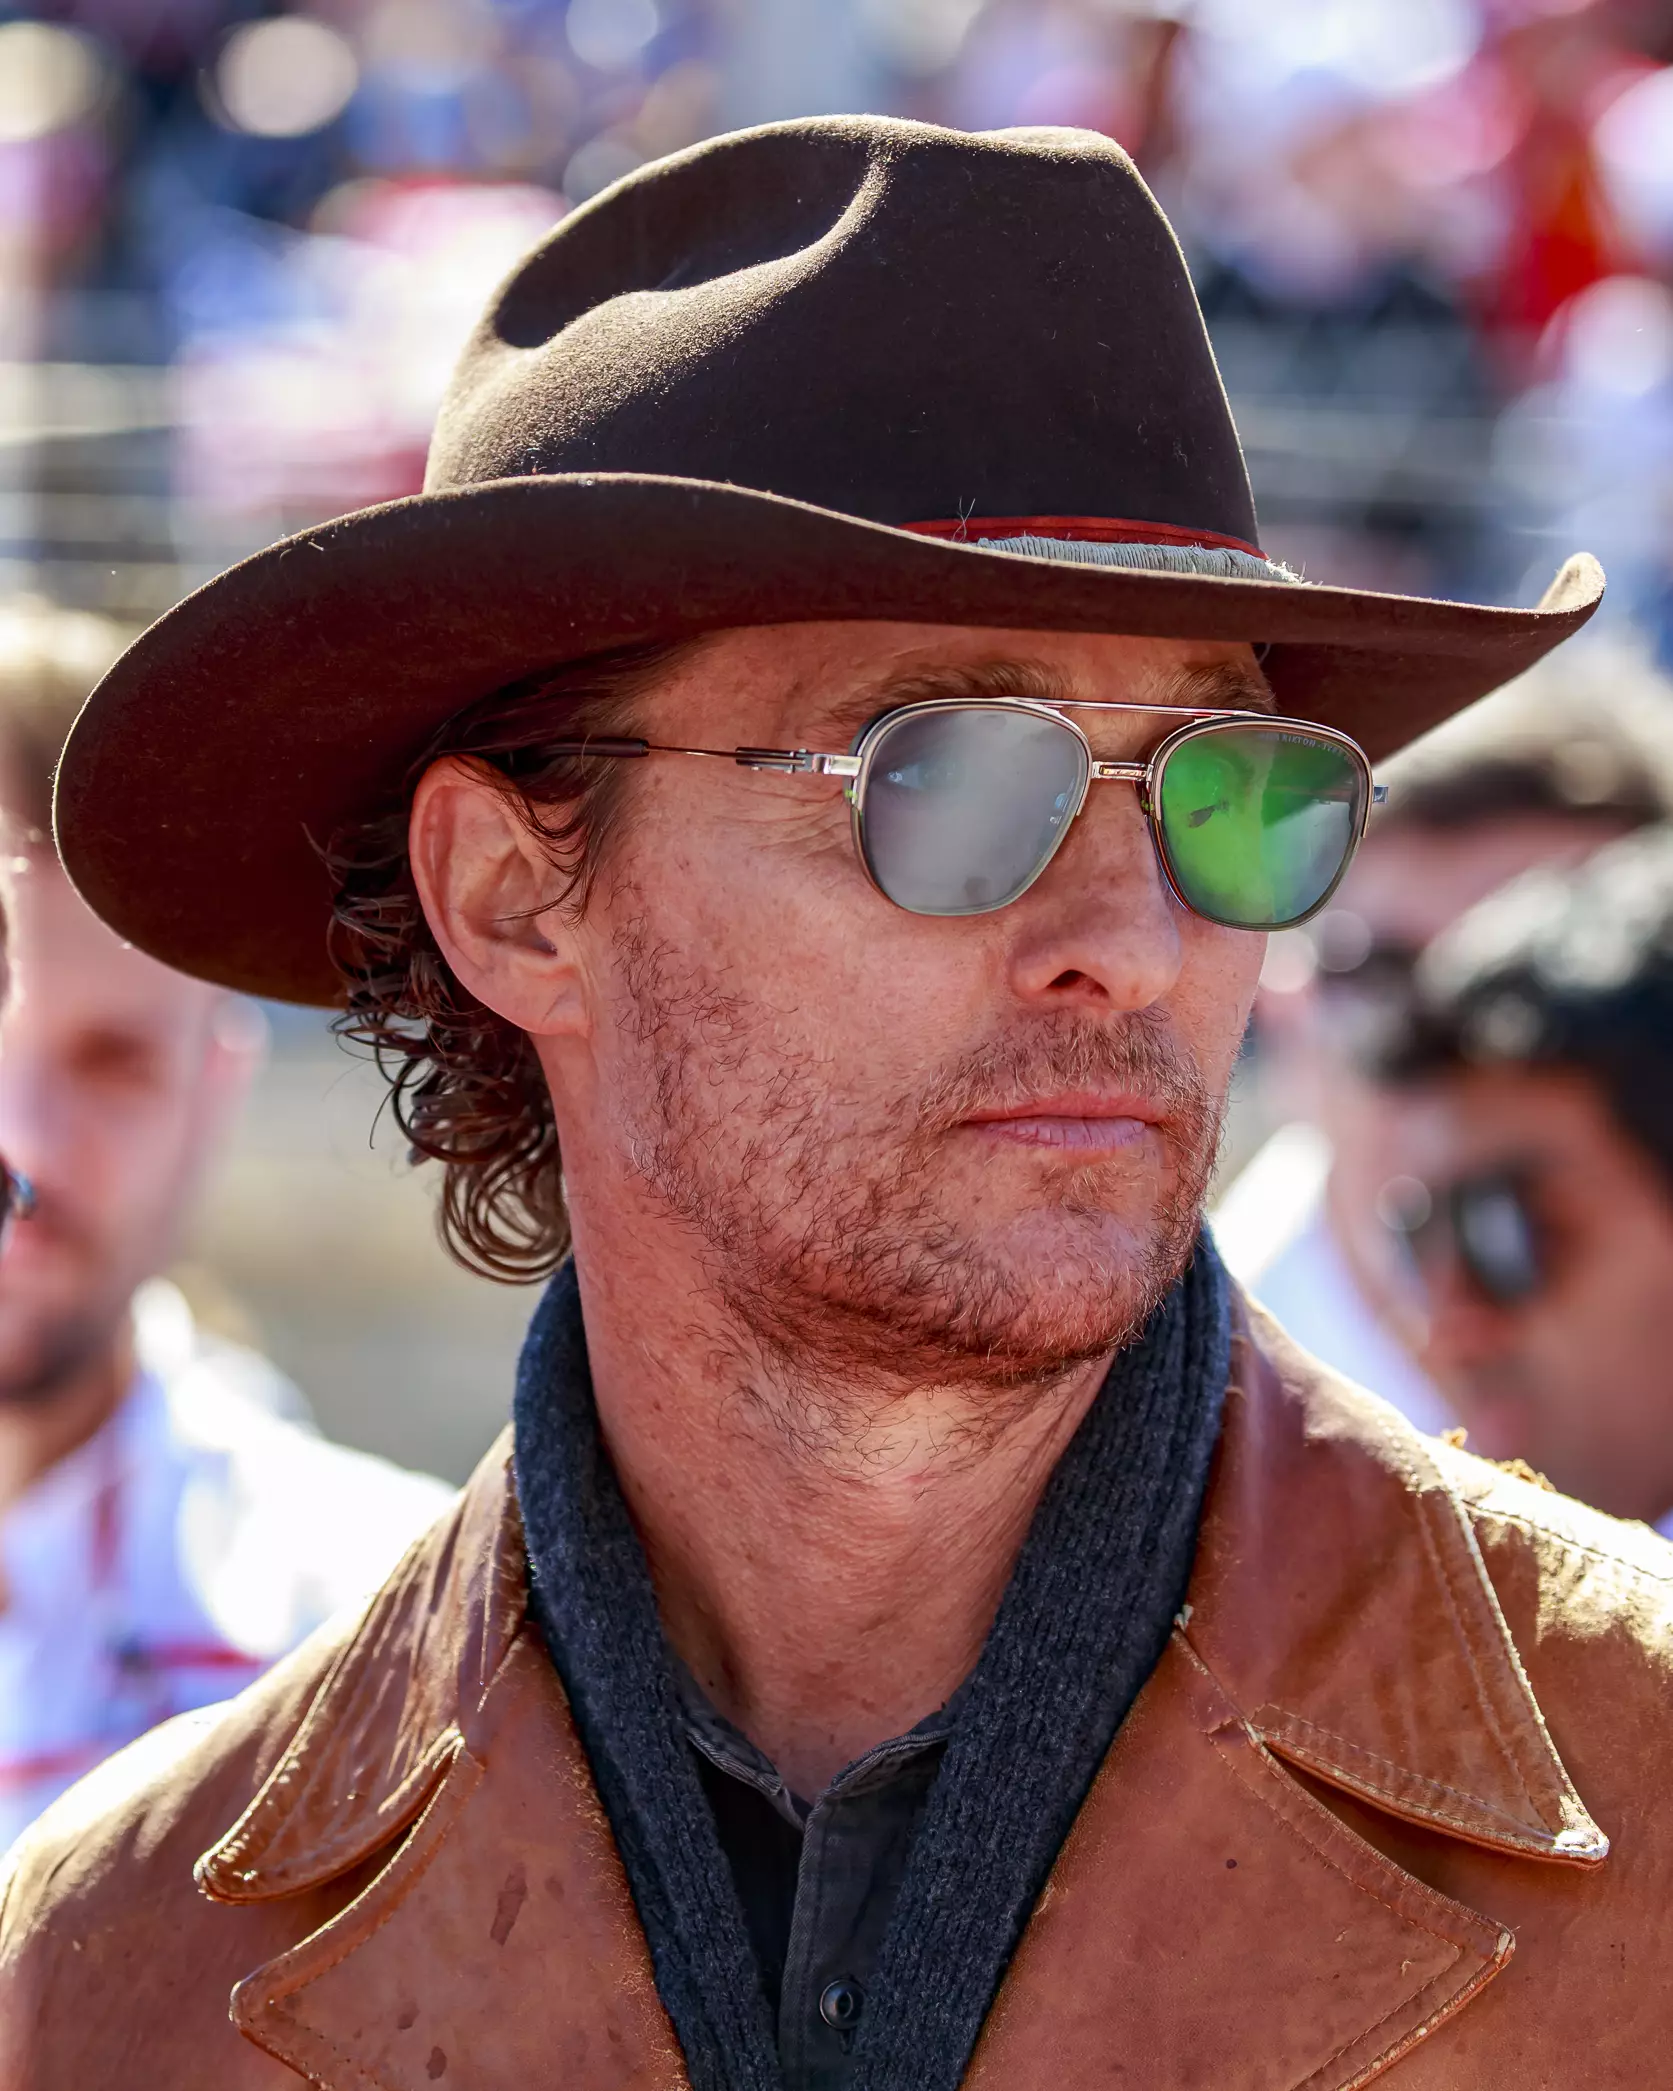 Mathew McConaughey has announced his arrival on Instagram in style.